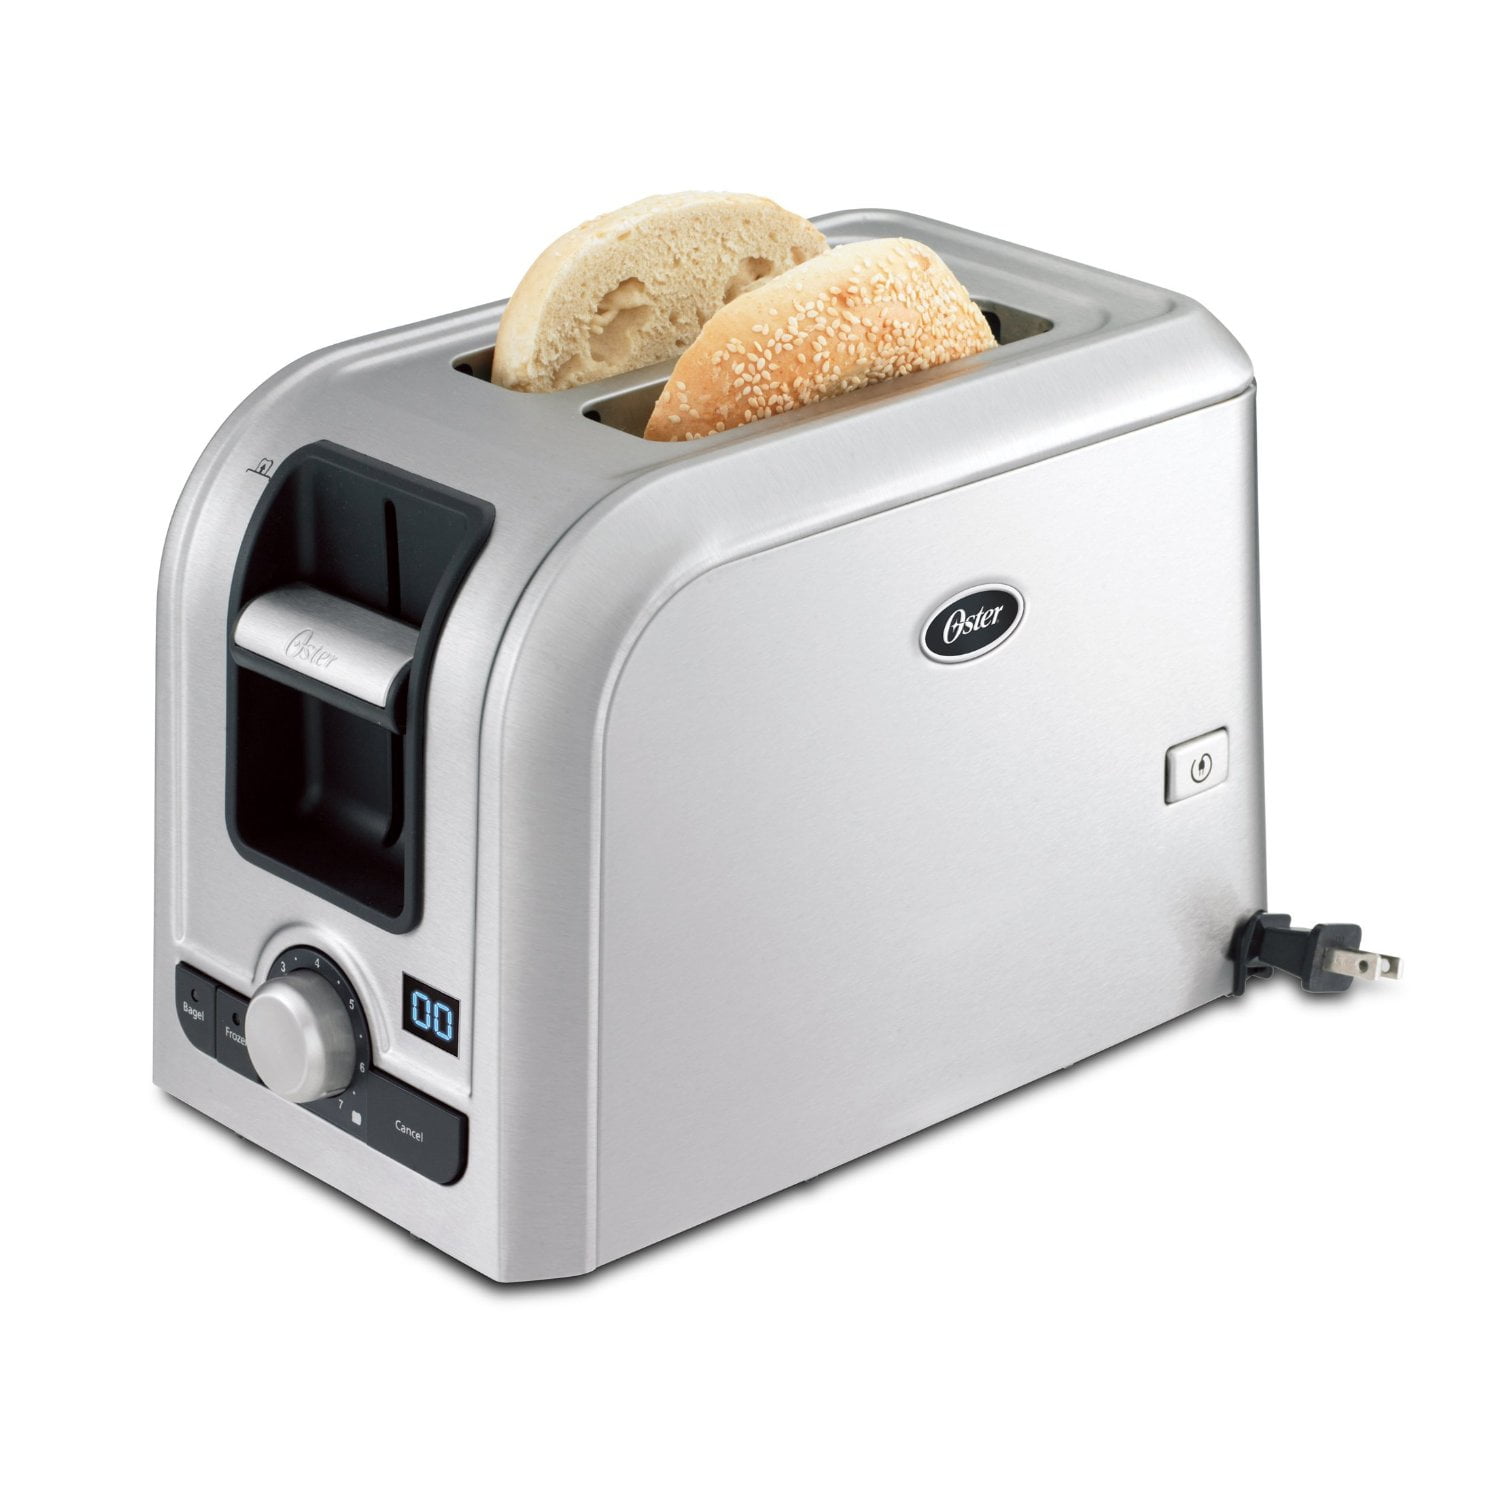 Oster 2 Slice Toaster - Brushed Stainless Steel